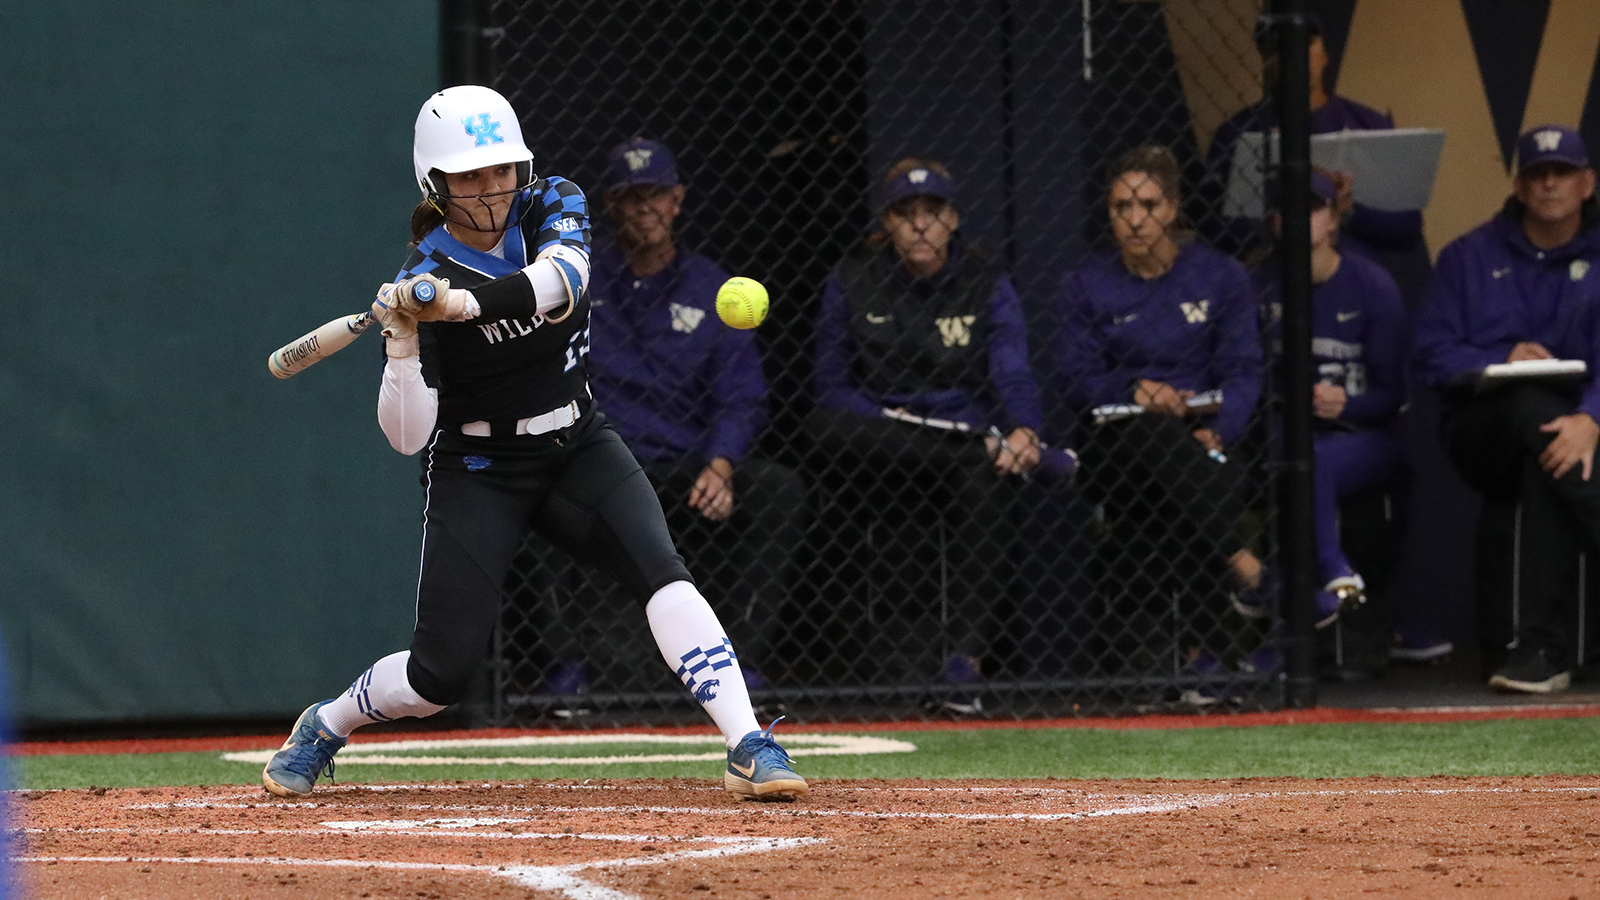 Peyton, Martens and Humes Crush Homers in Win vs. Dartmouth